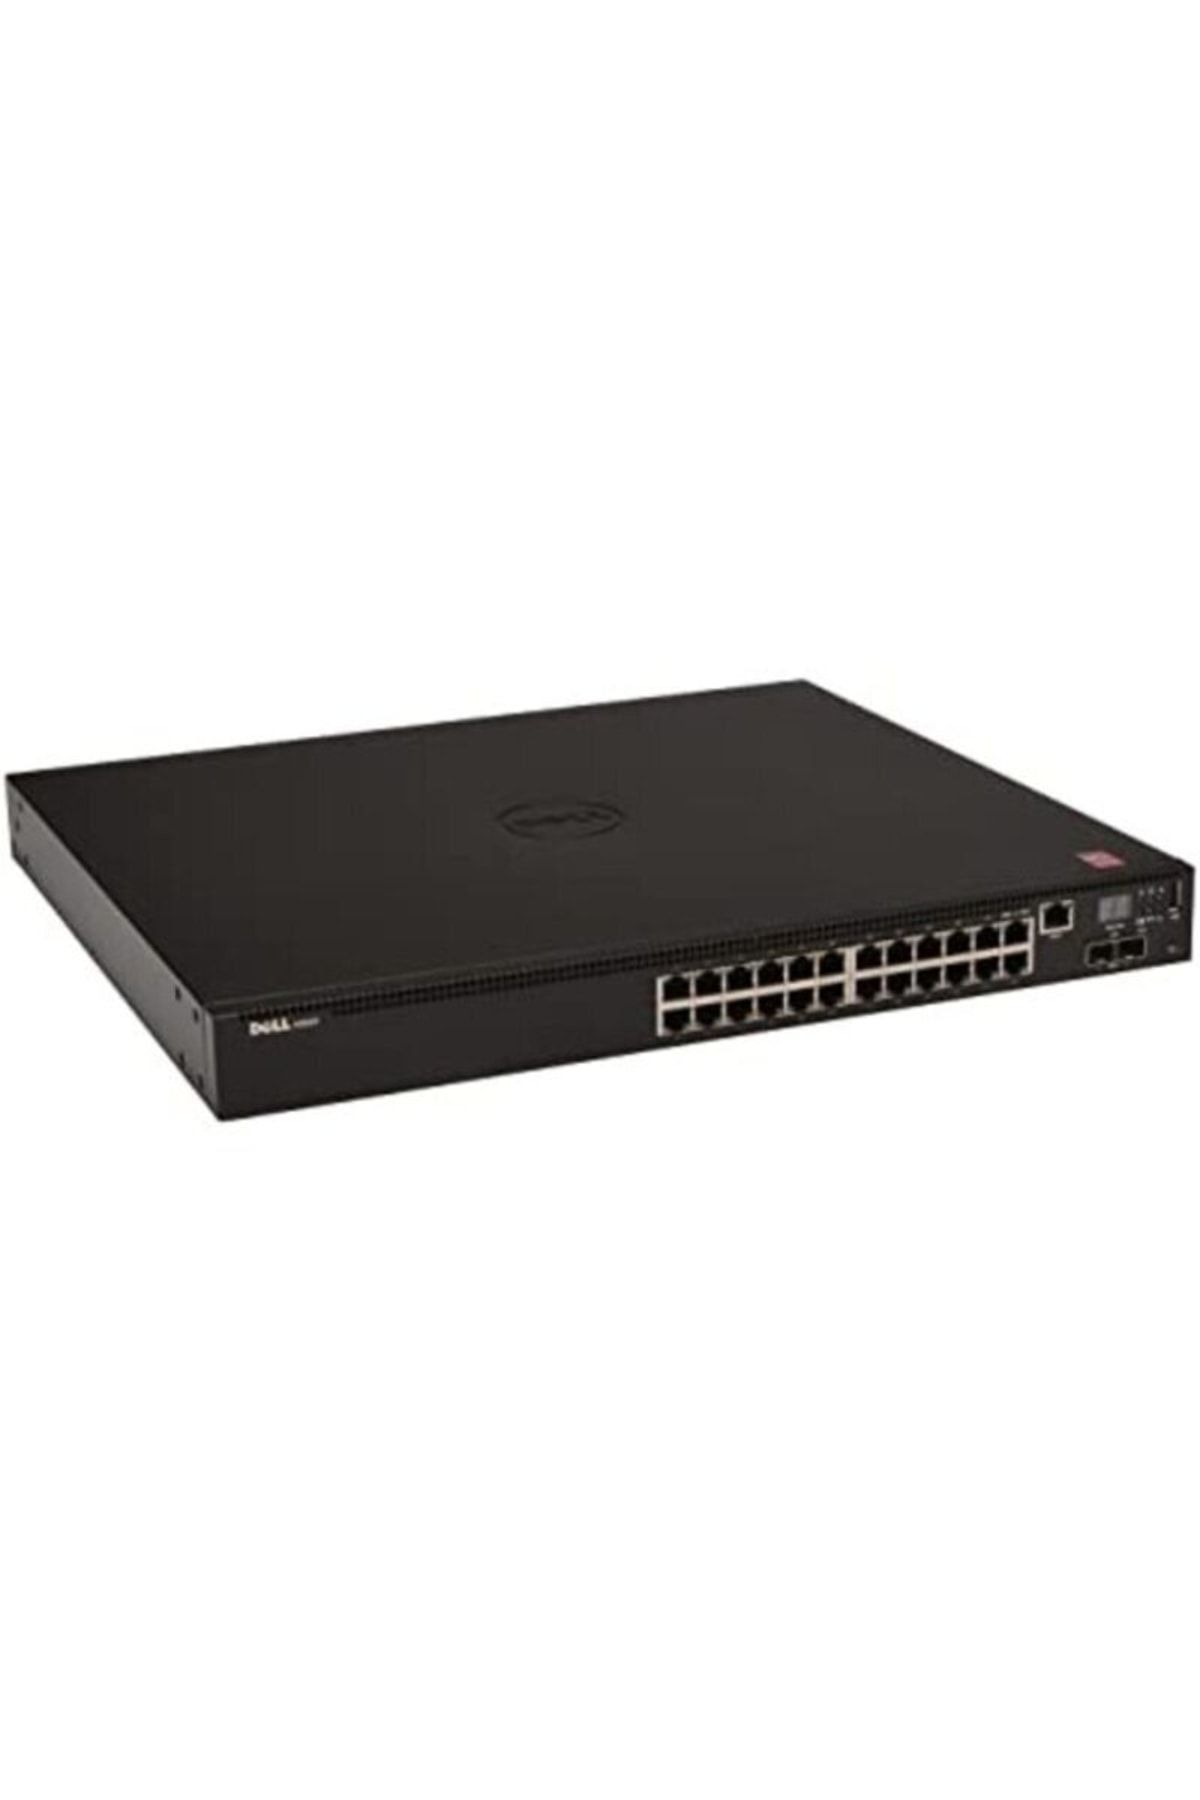 Dell Networking N1524p